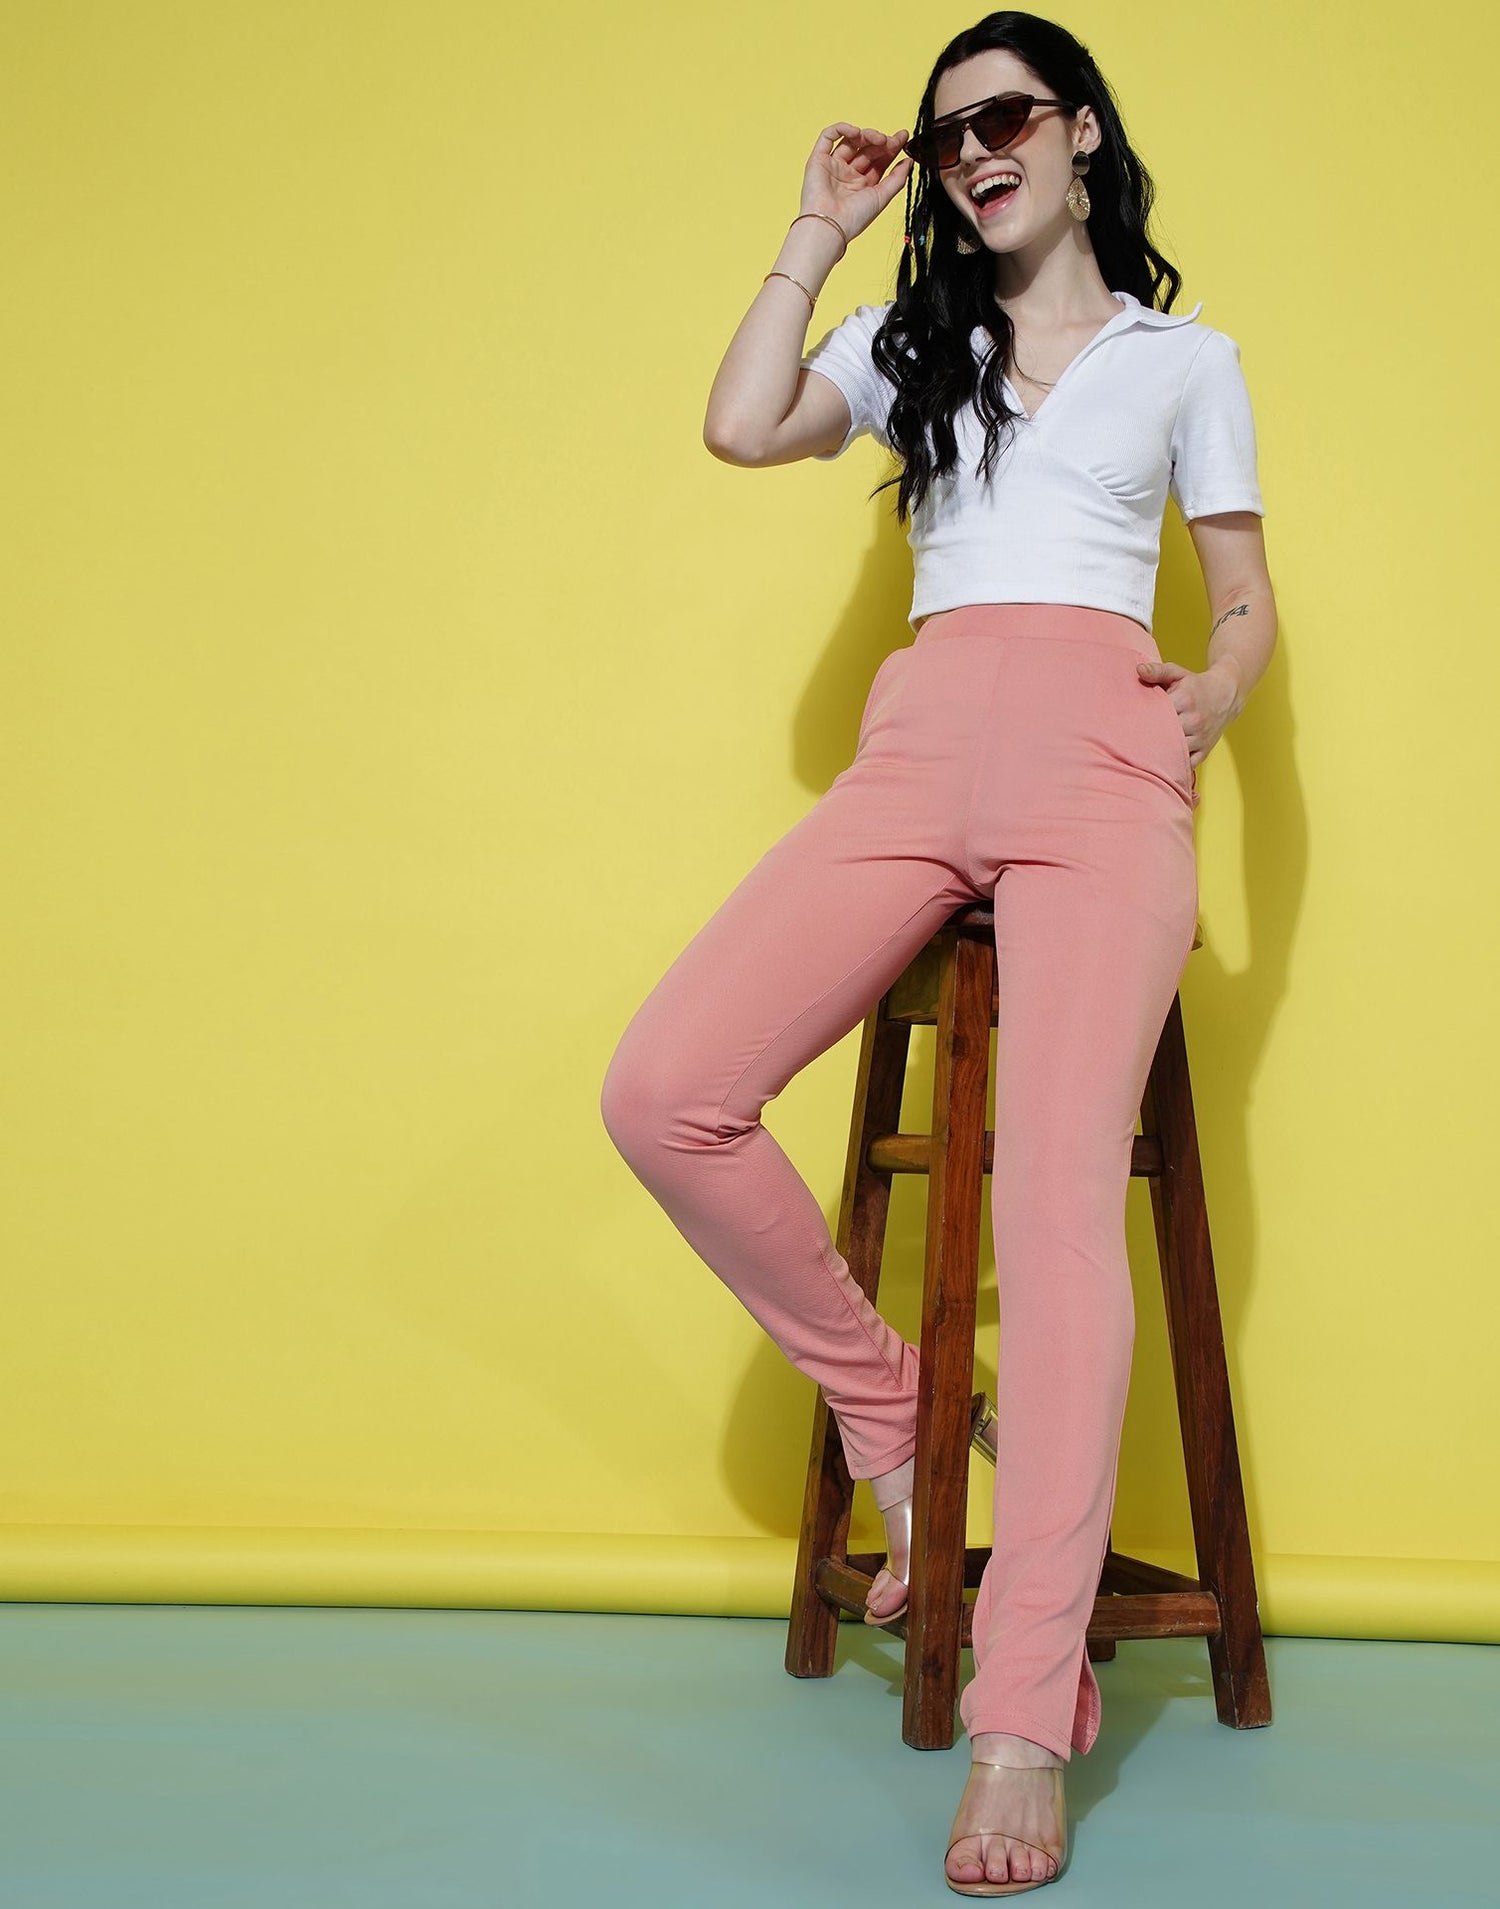 Buy Peach Leggings for Women by Ginger by lifestyle Online